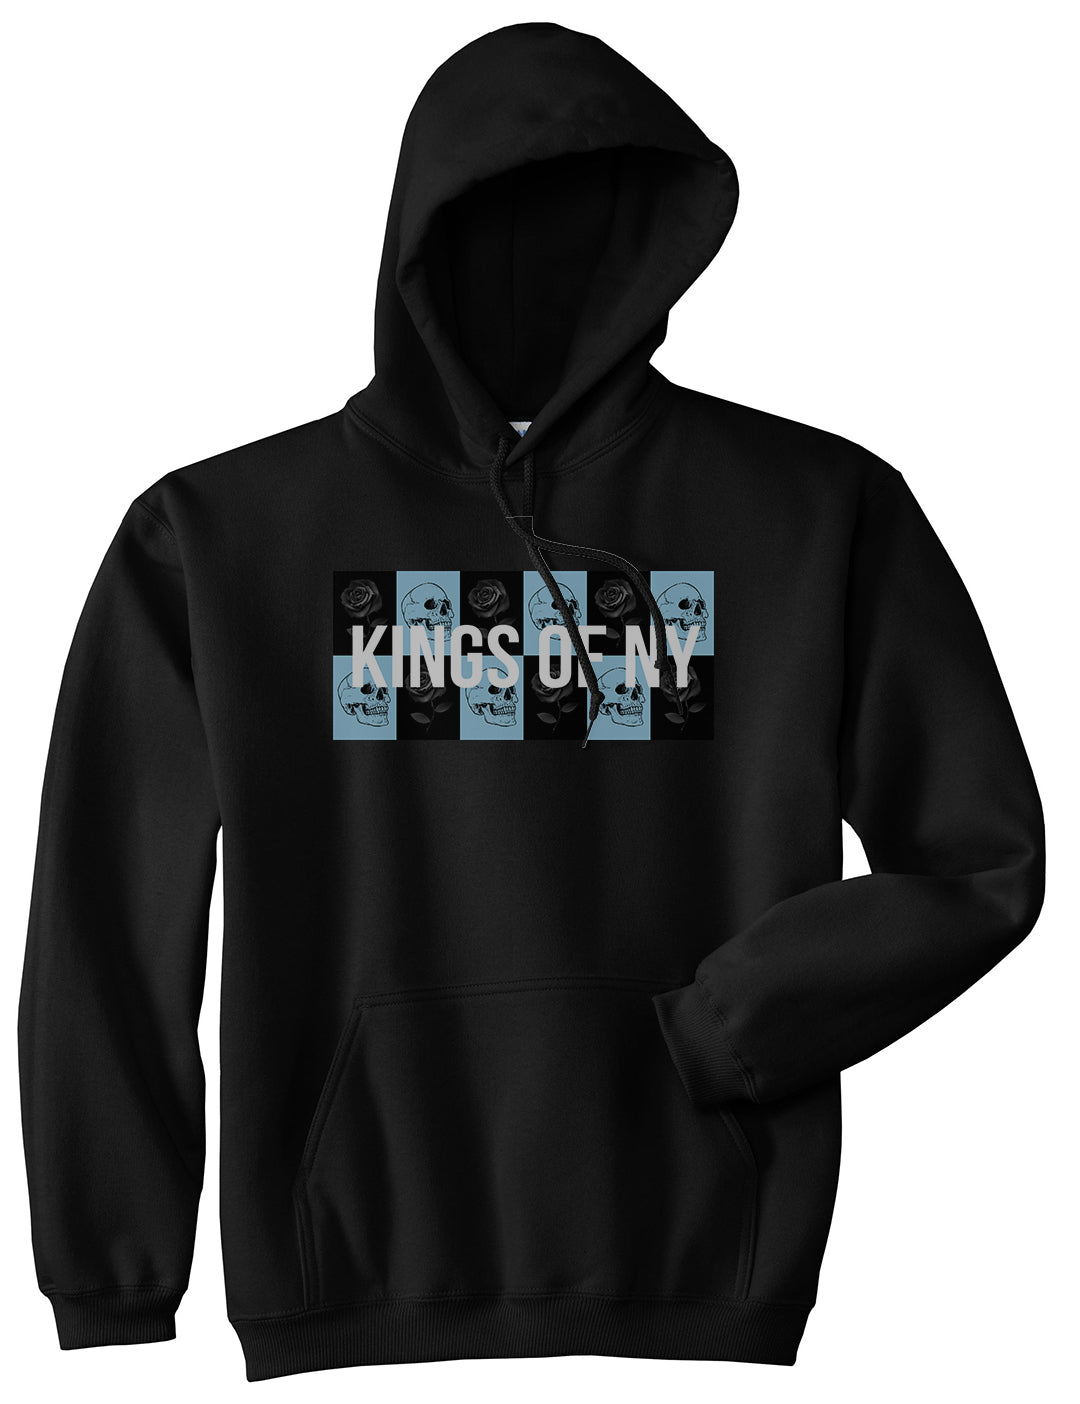 Skull And Rose Box Logo Mens Pullover Hoodie Black by Kings Of NY